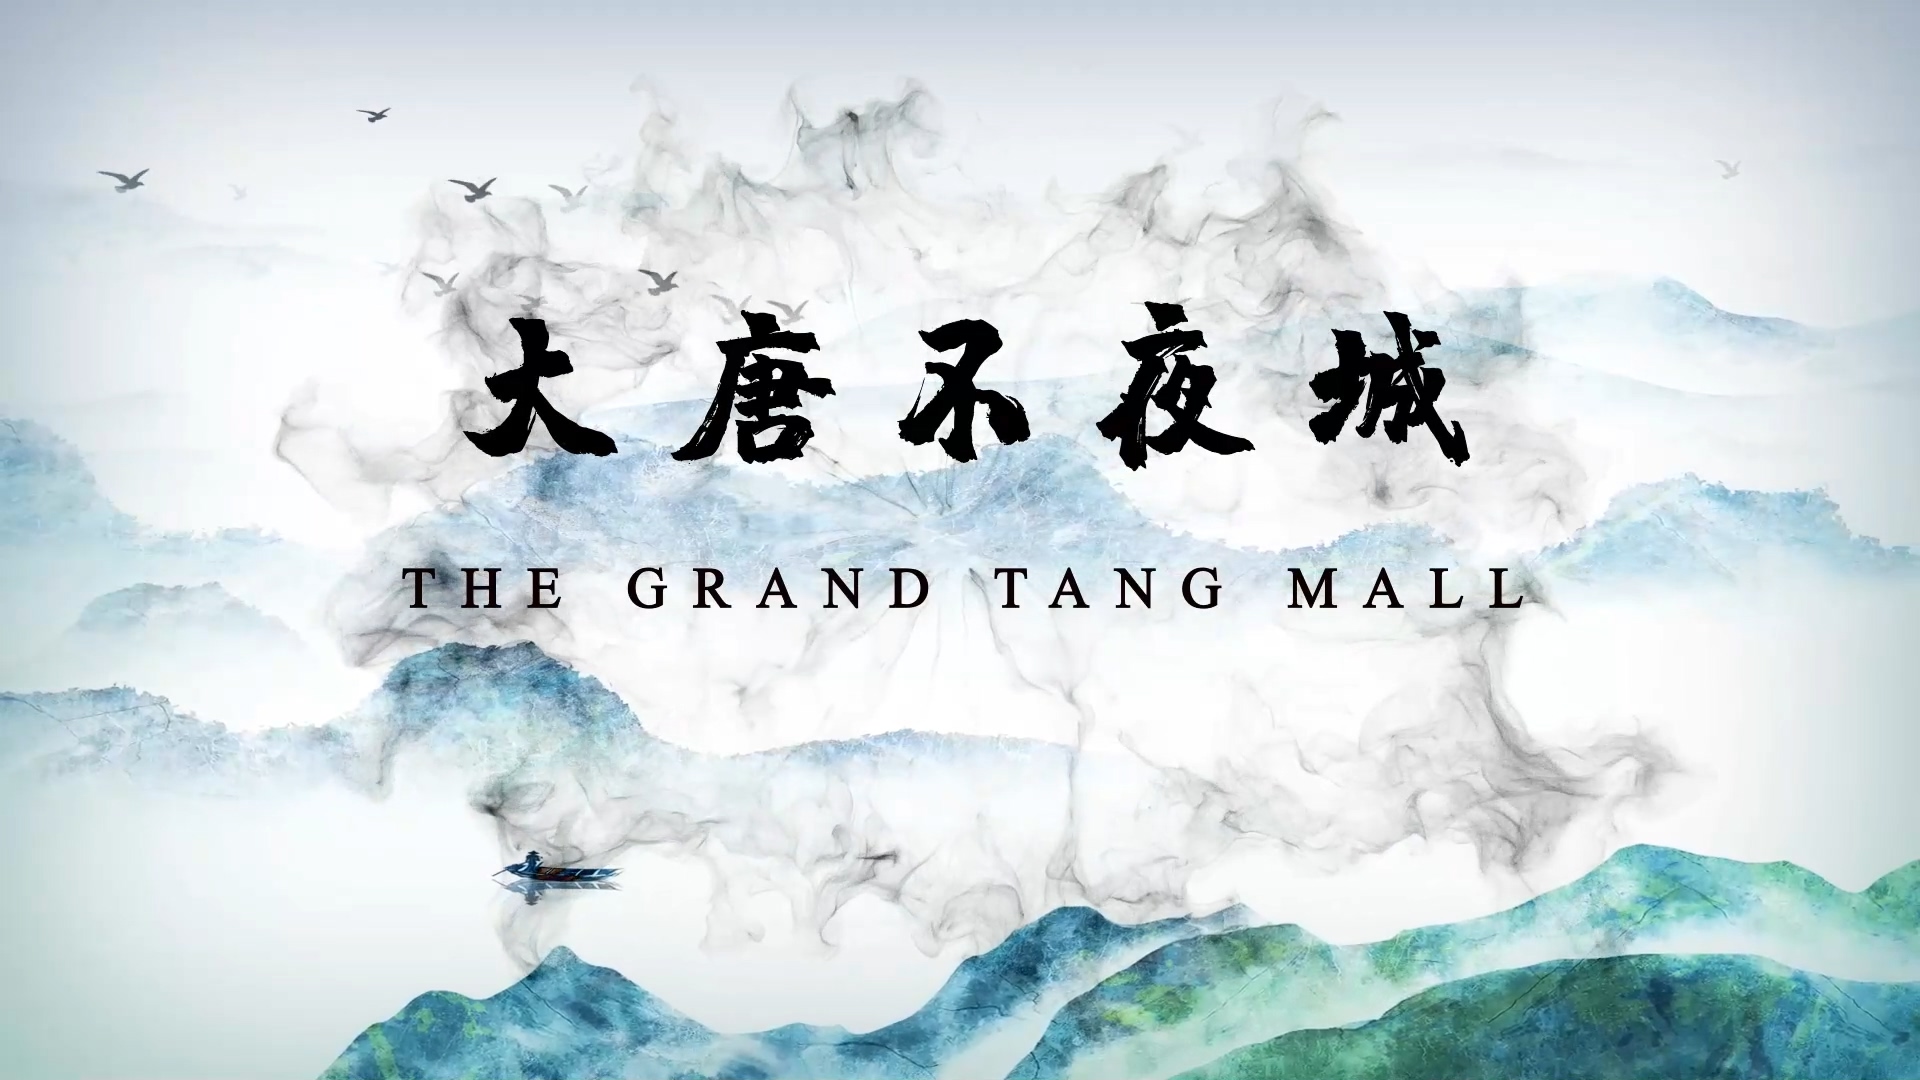 The Grand Tang Mall